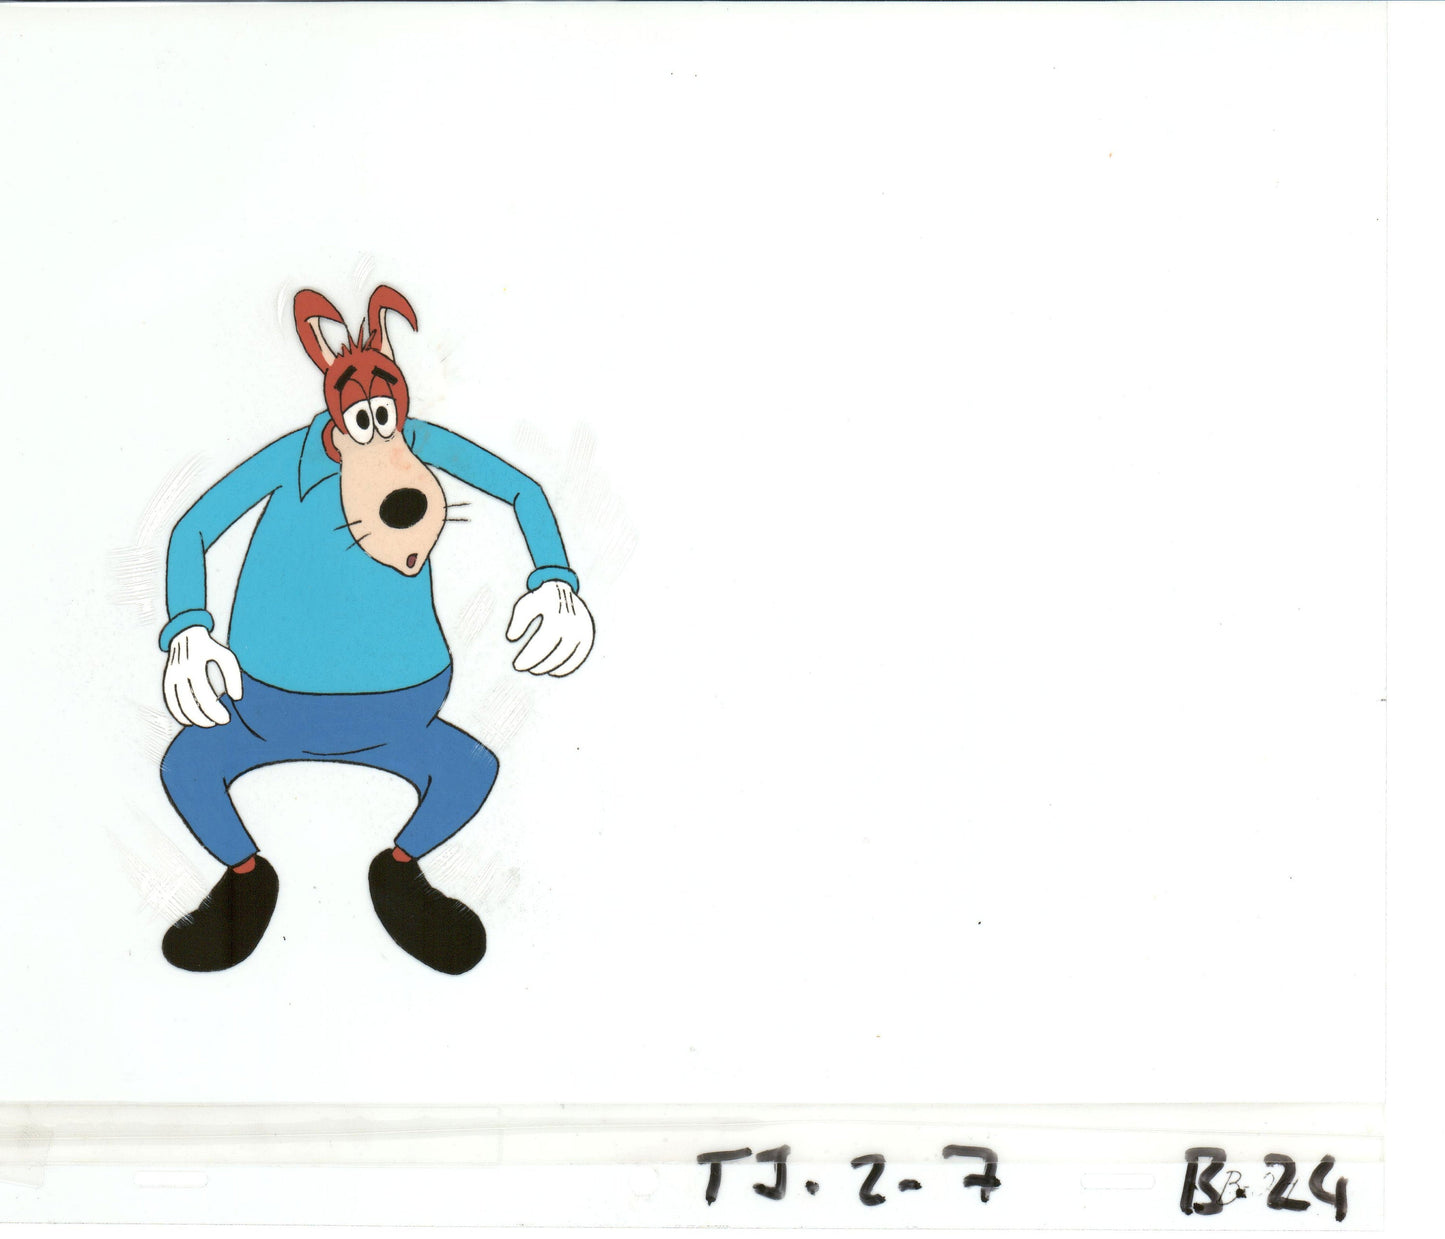 Tom & Jerry Original Production Animation Cel from Filmation 1980-82 b4382